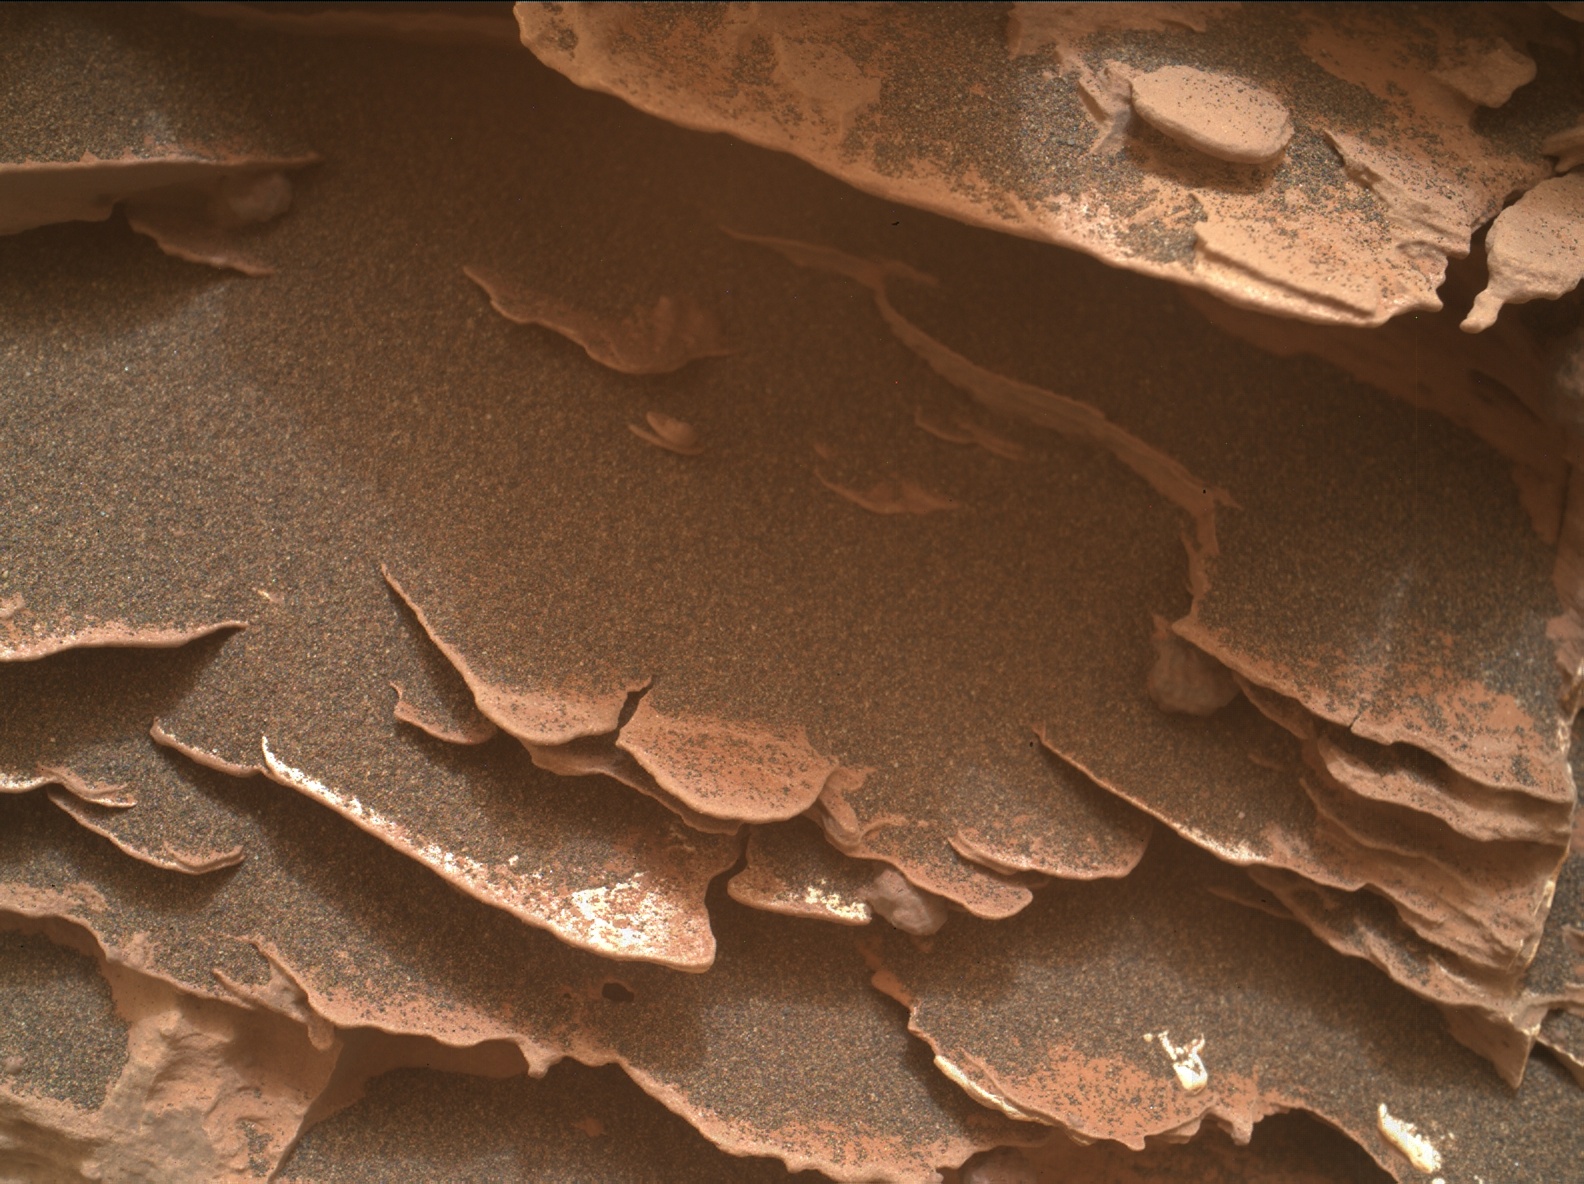 Nasa's Mars rover Curiosity acquired this image using its Mars Hand Lens Imager (MAHLI) on Sol 2082